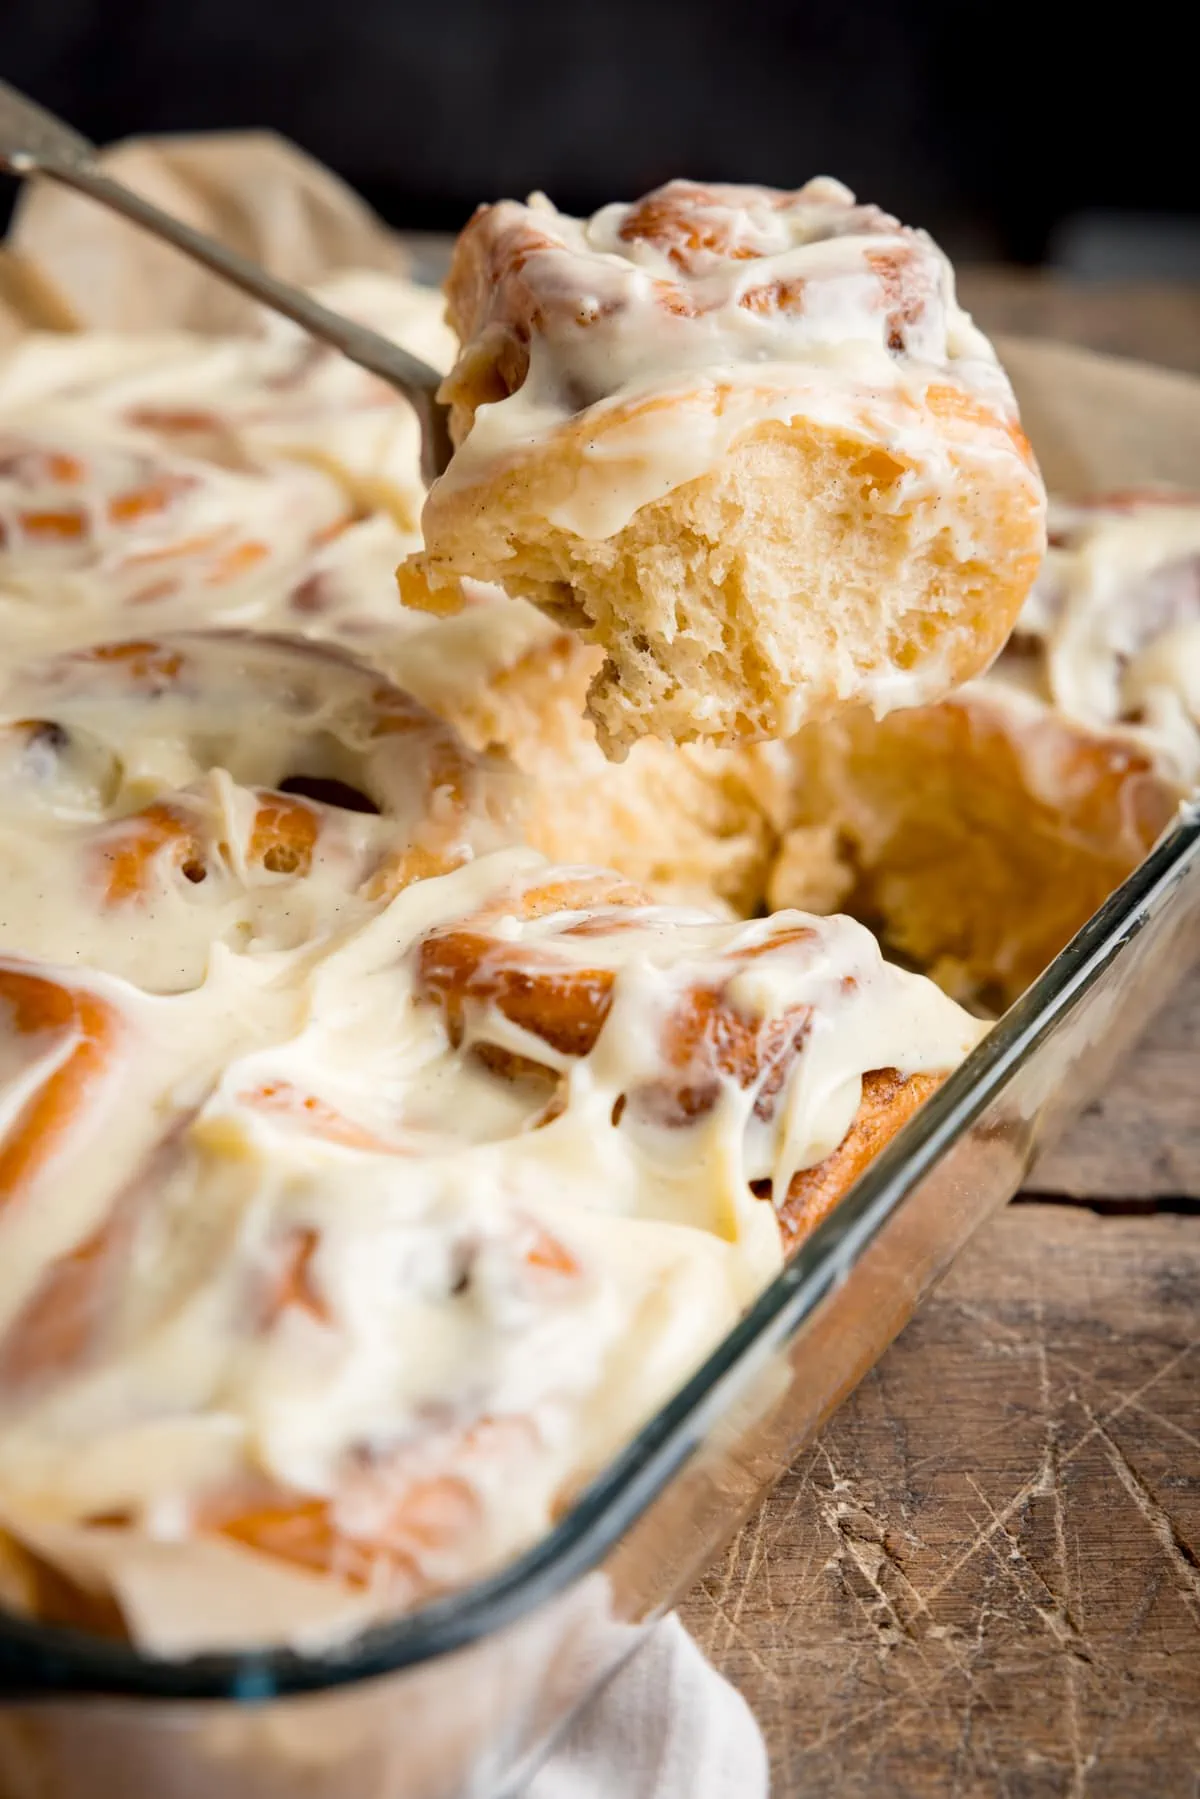 A glass baking dish of frosted cinnamon rolls with one cinnamon roll being taken out on a fork. The dish is on a wooden table and there is part of a beige napkin in shot.